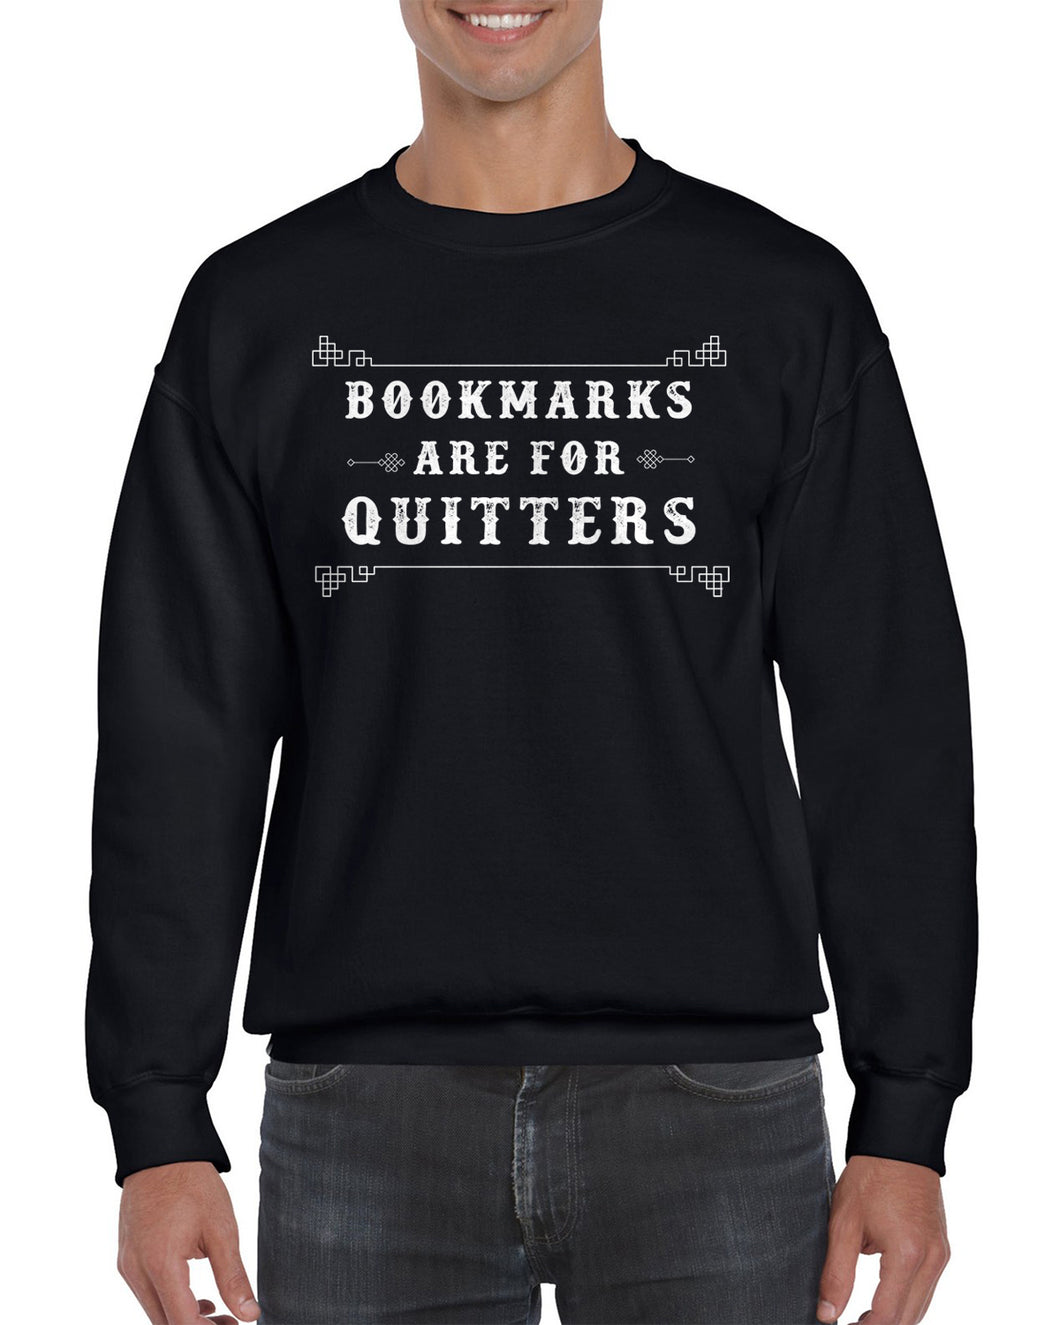 Bookmarks are for Quiiters Funny Bookworm Crewneck Sweatshirt